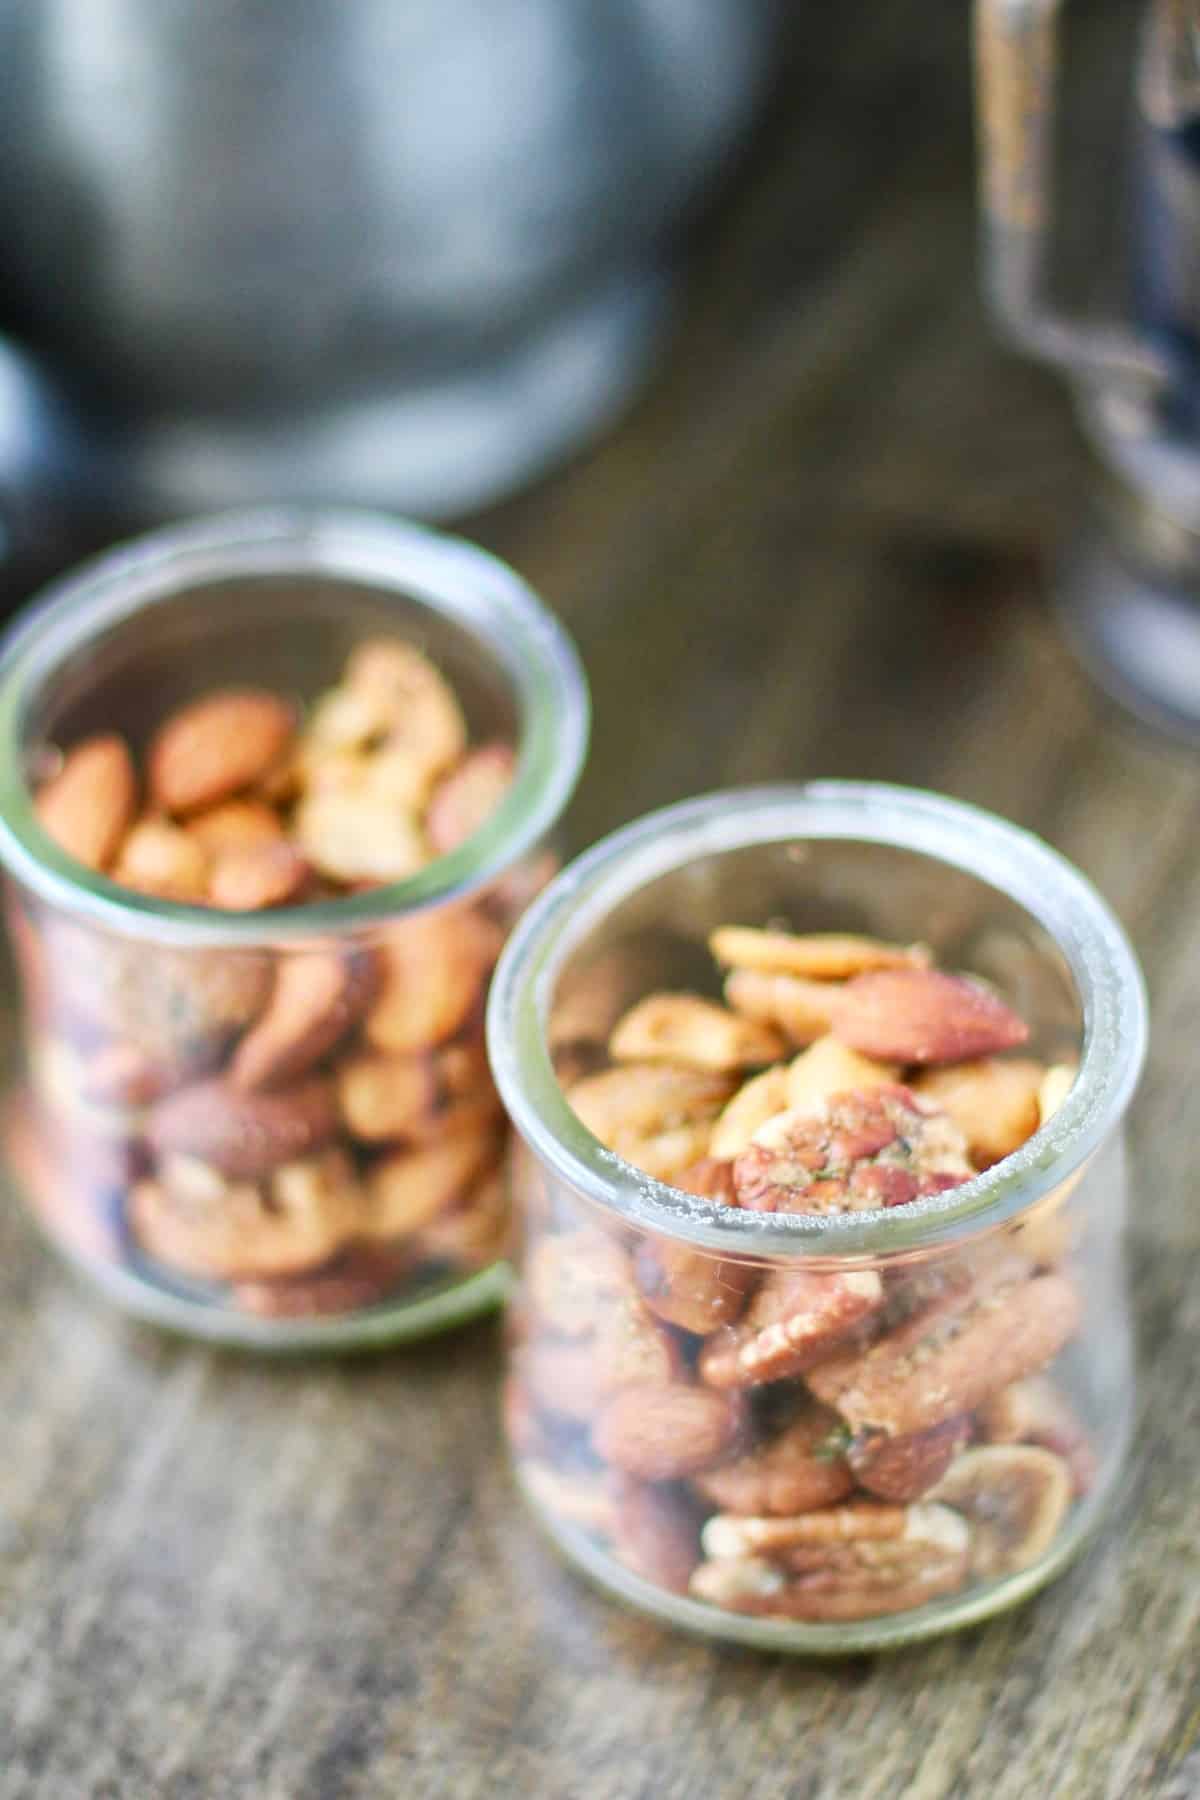 Sweet and Spicy Roasted Nuts